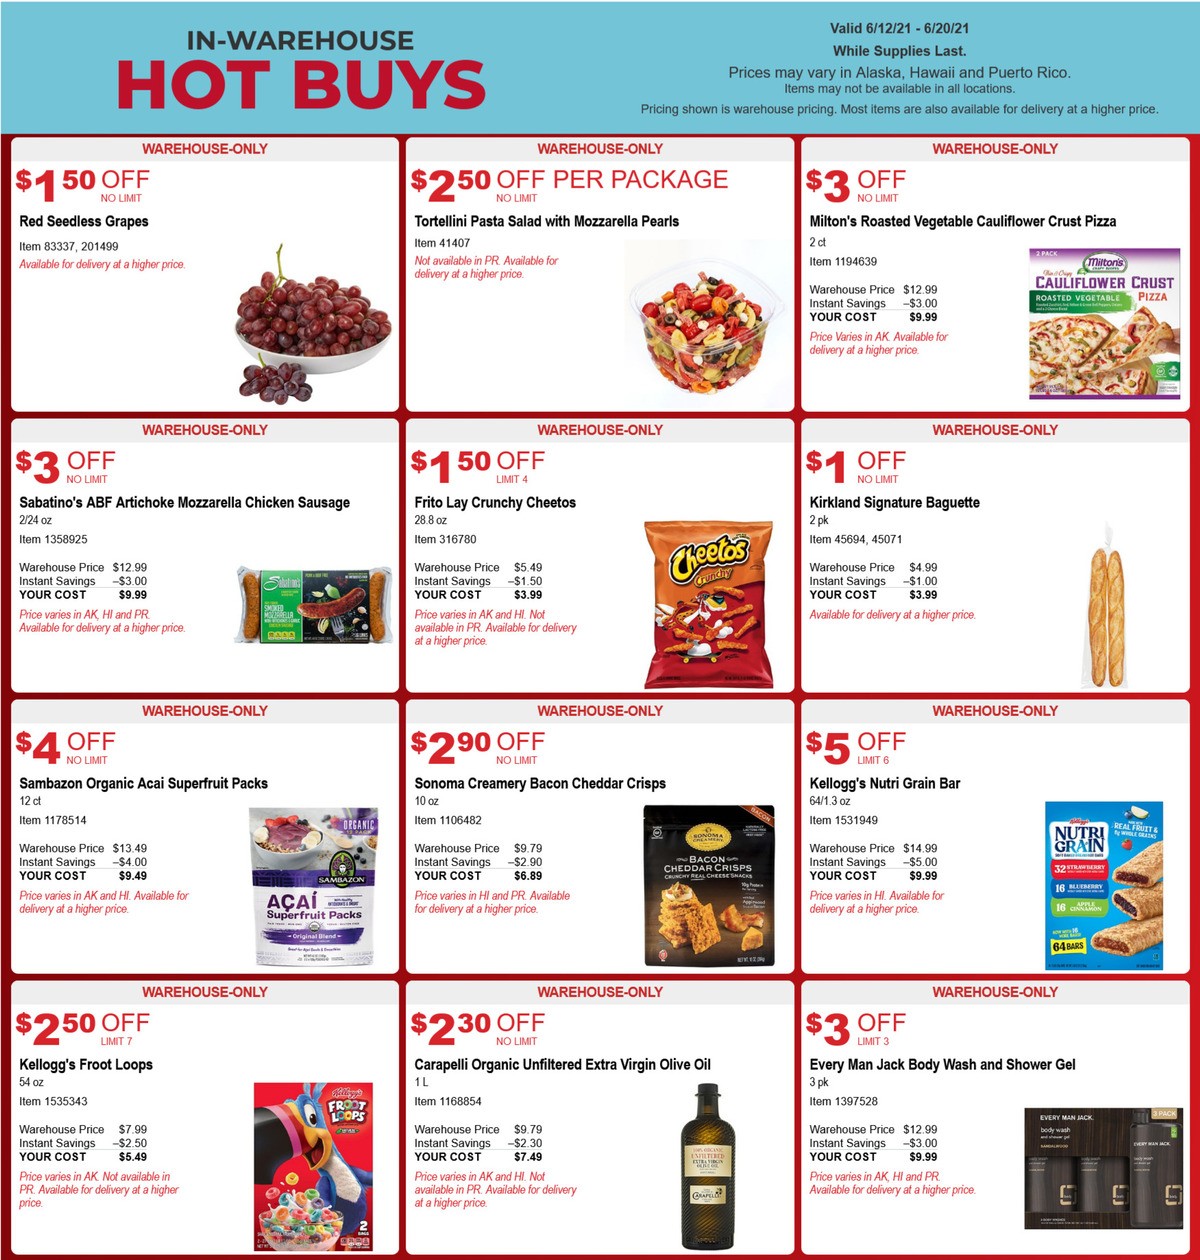 Costco Hot Buys Special Buys and Warehouse Savings from June 12